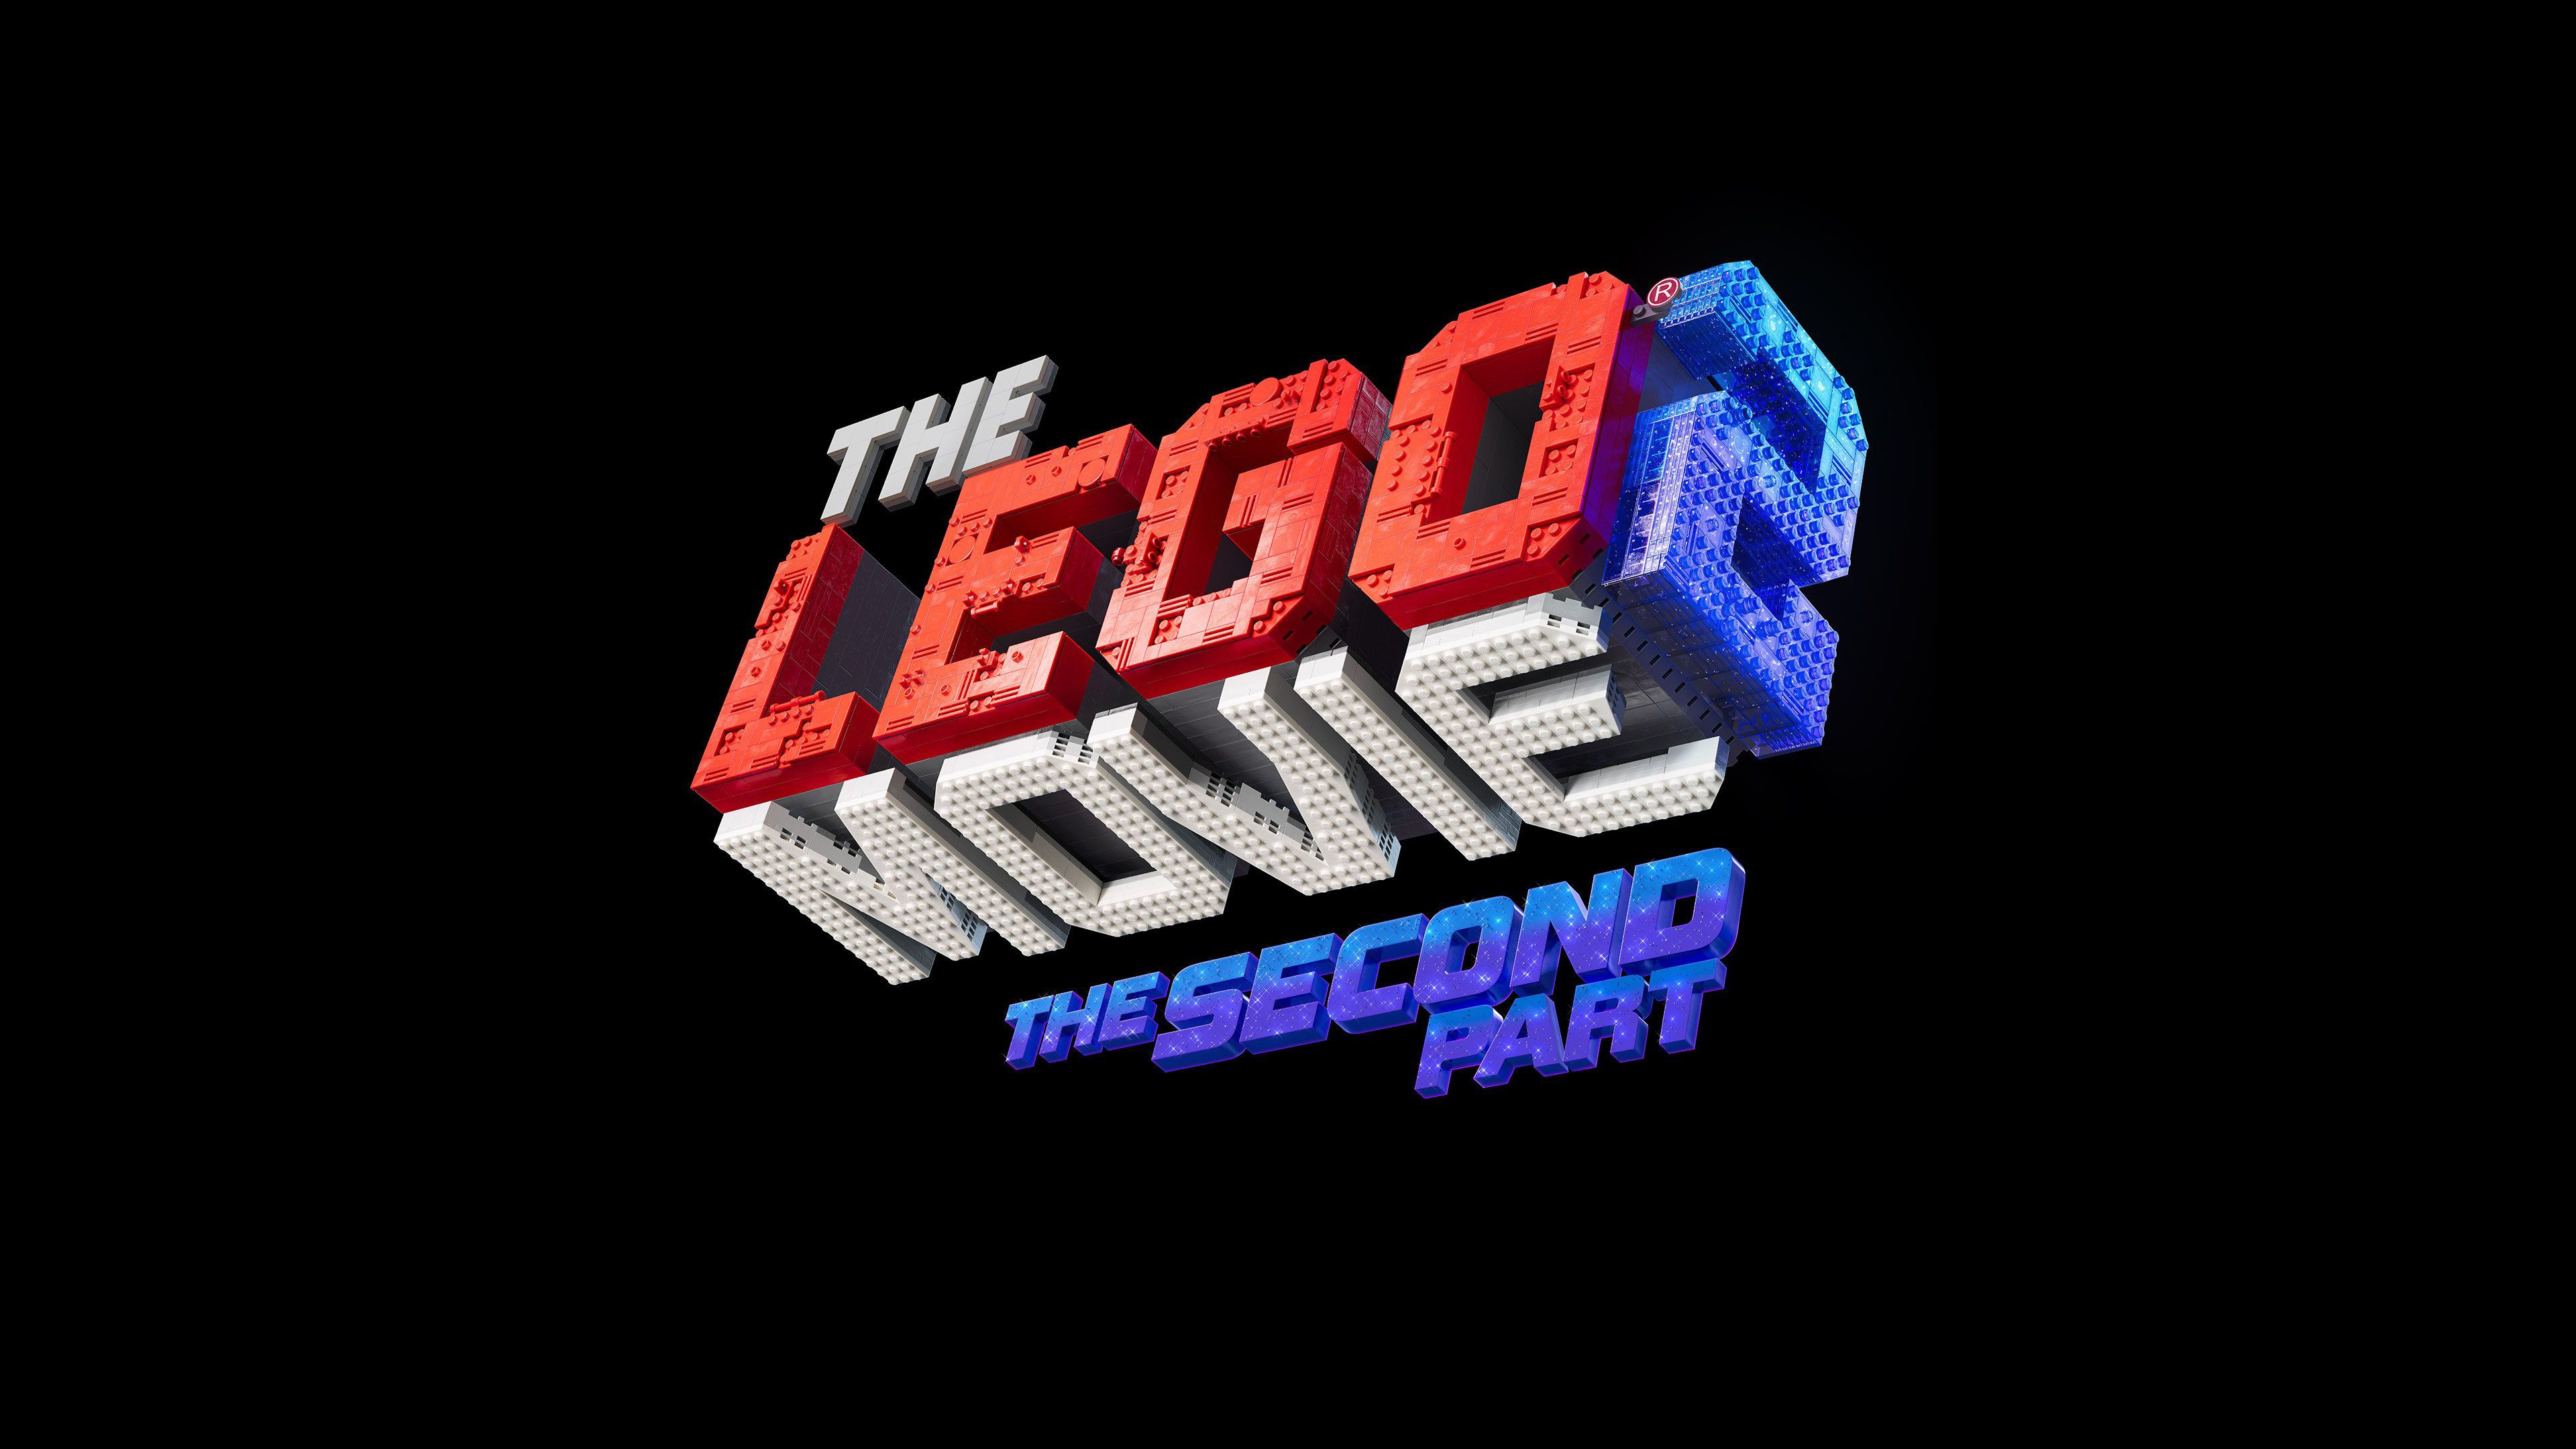 The Lego Movie 2: The Second Part (Movie 2019) 4K 8K HD Wallpaper